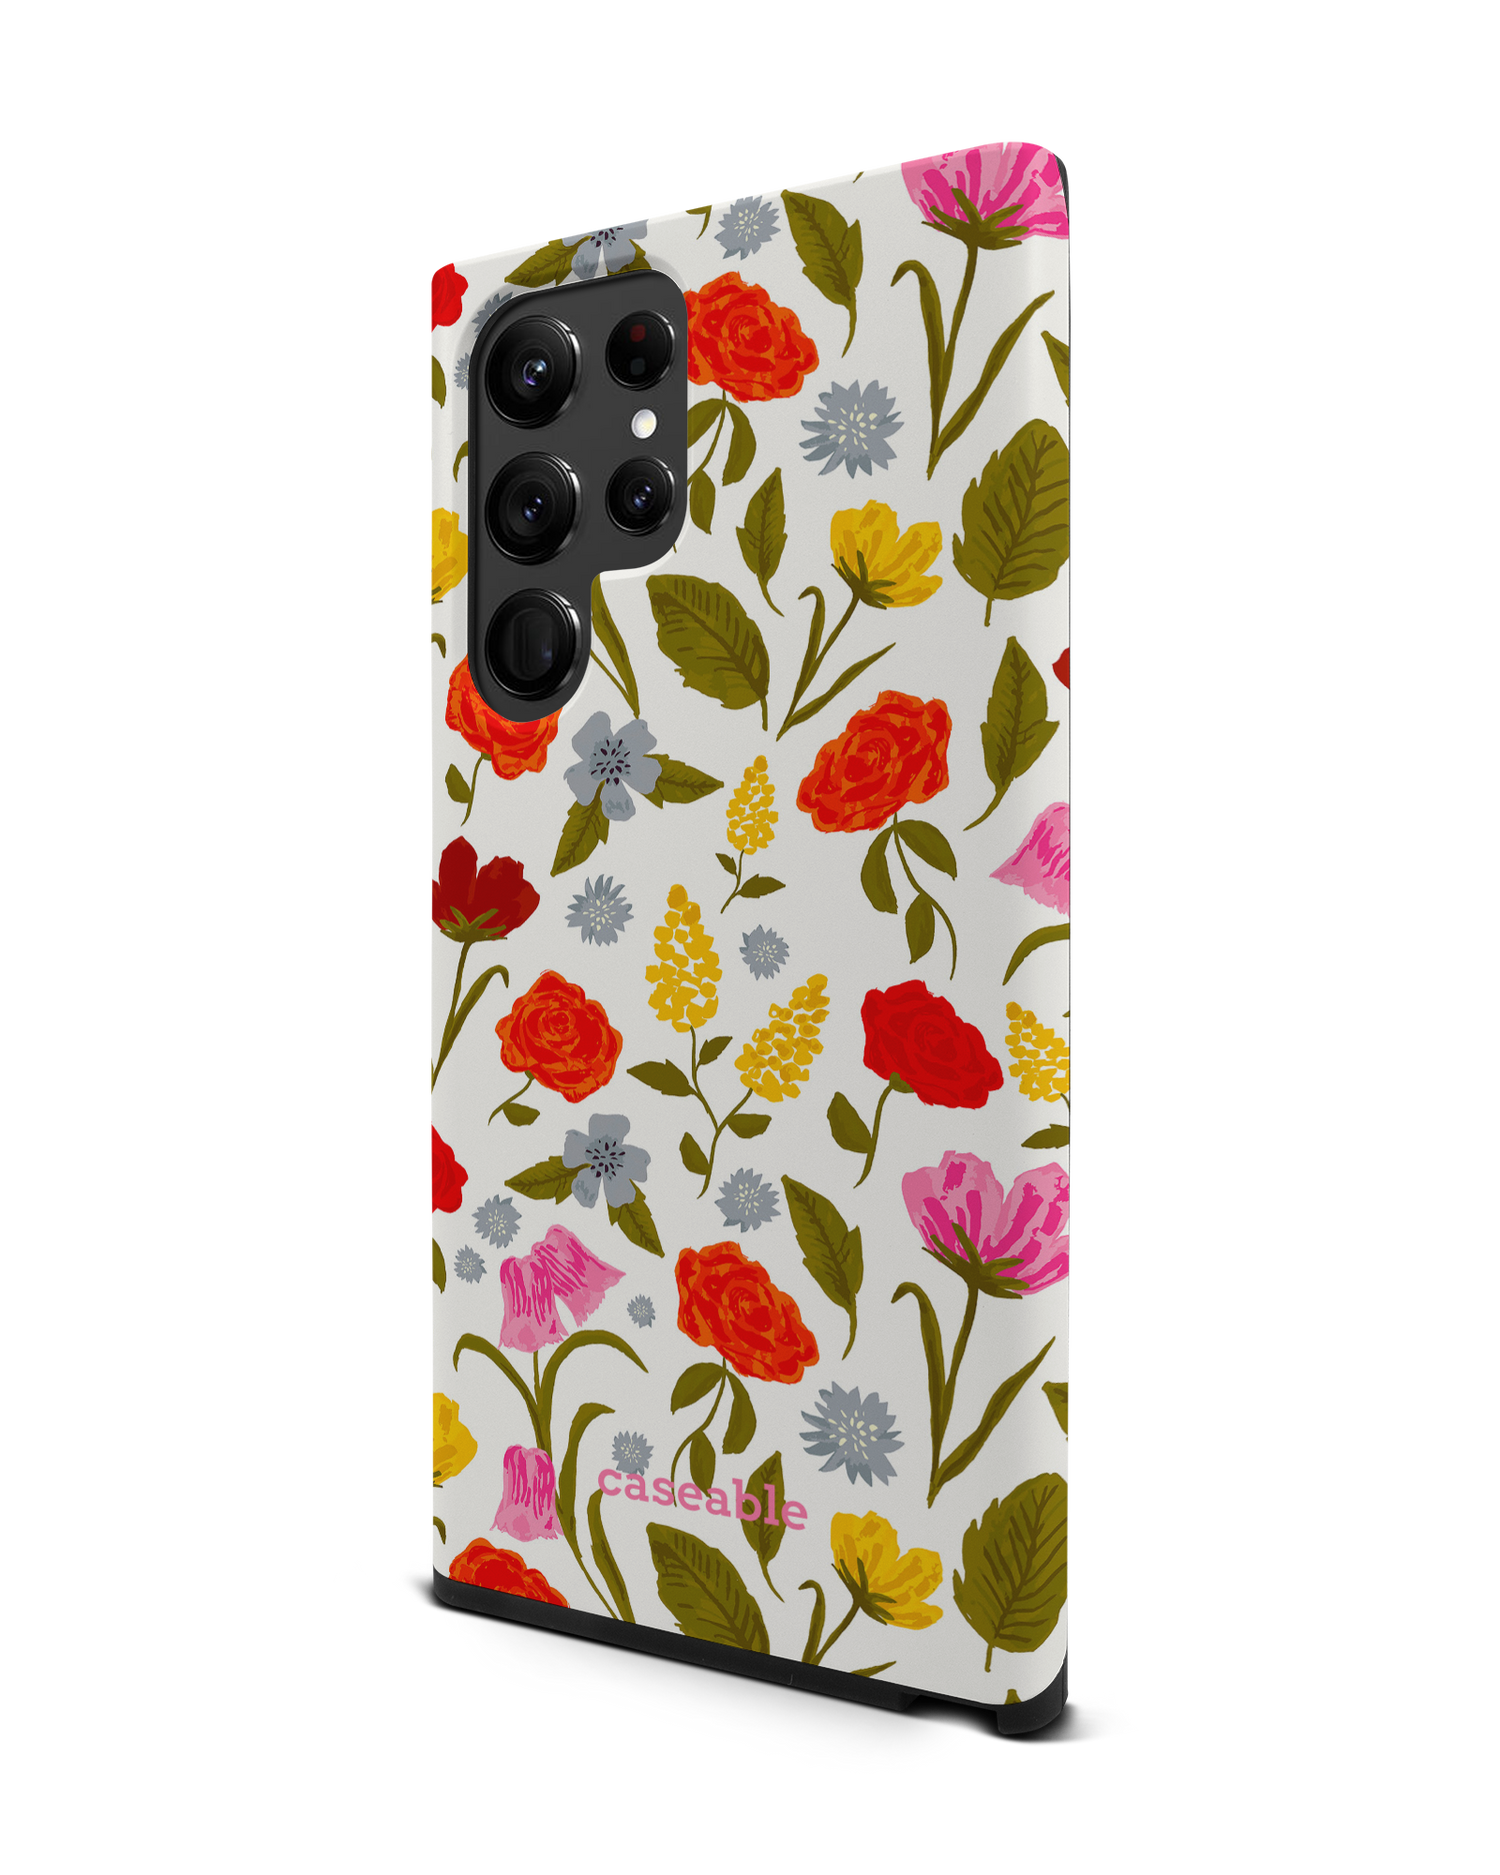 Botanical Beauties Premium Phone Case Samsung Galaxy S22 Ultra 5G: View from the right side